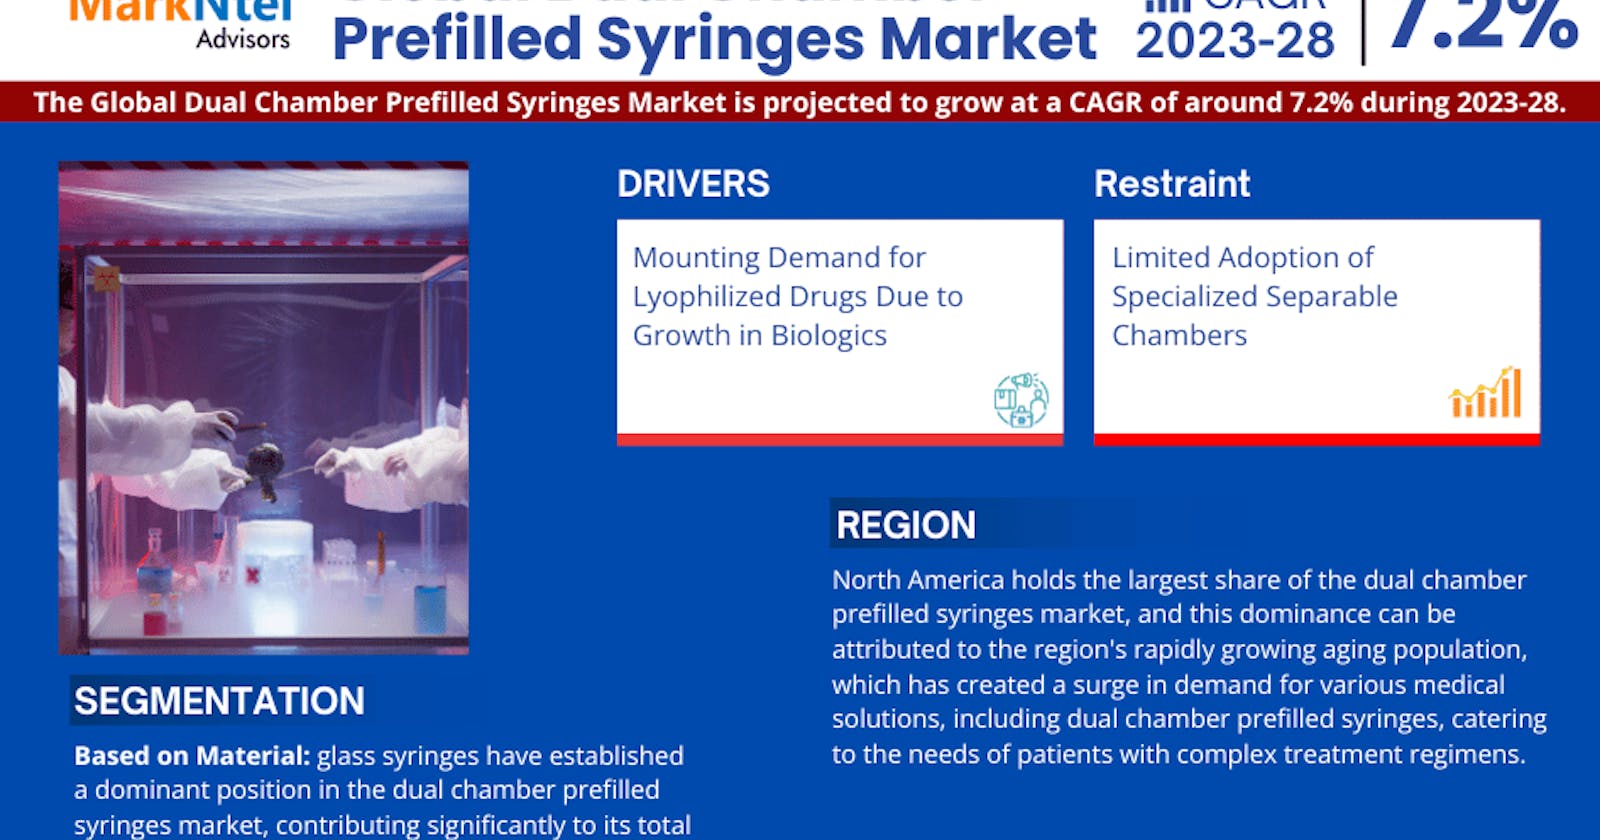 Dual Chamber Prefilled Syringes Market Forecasts 7.2% CAGR Growth Through 2028